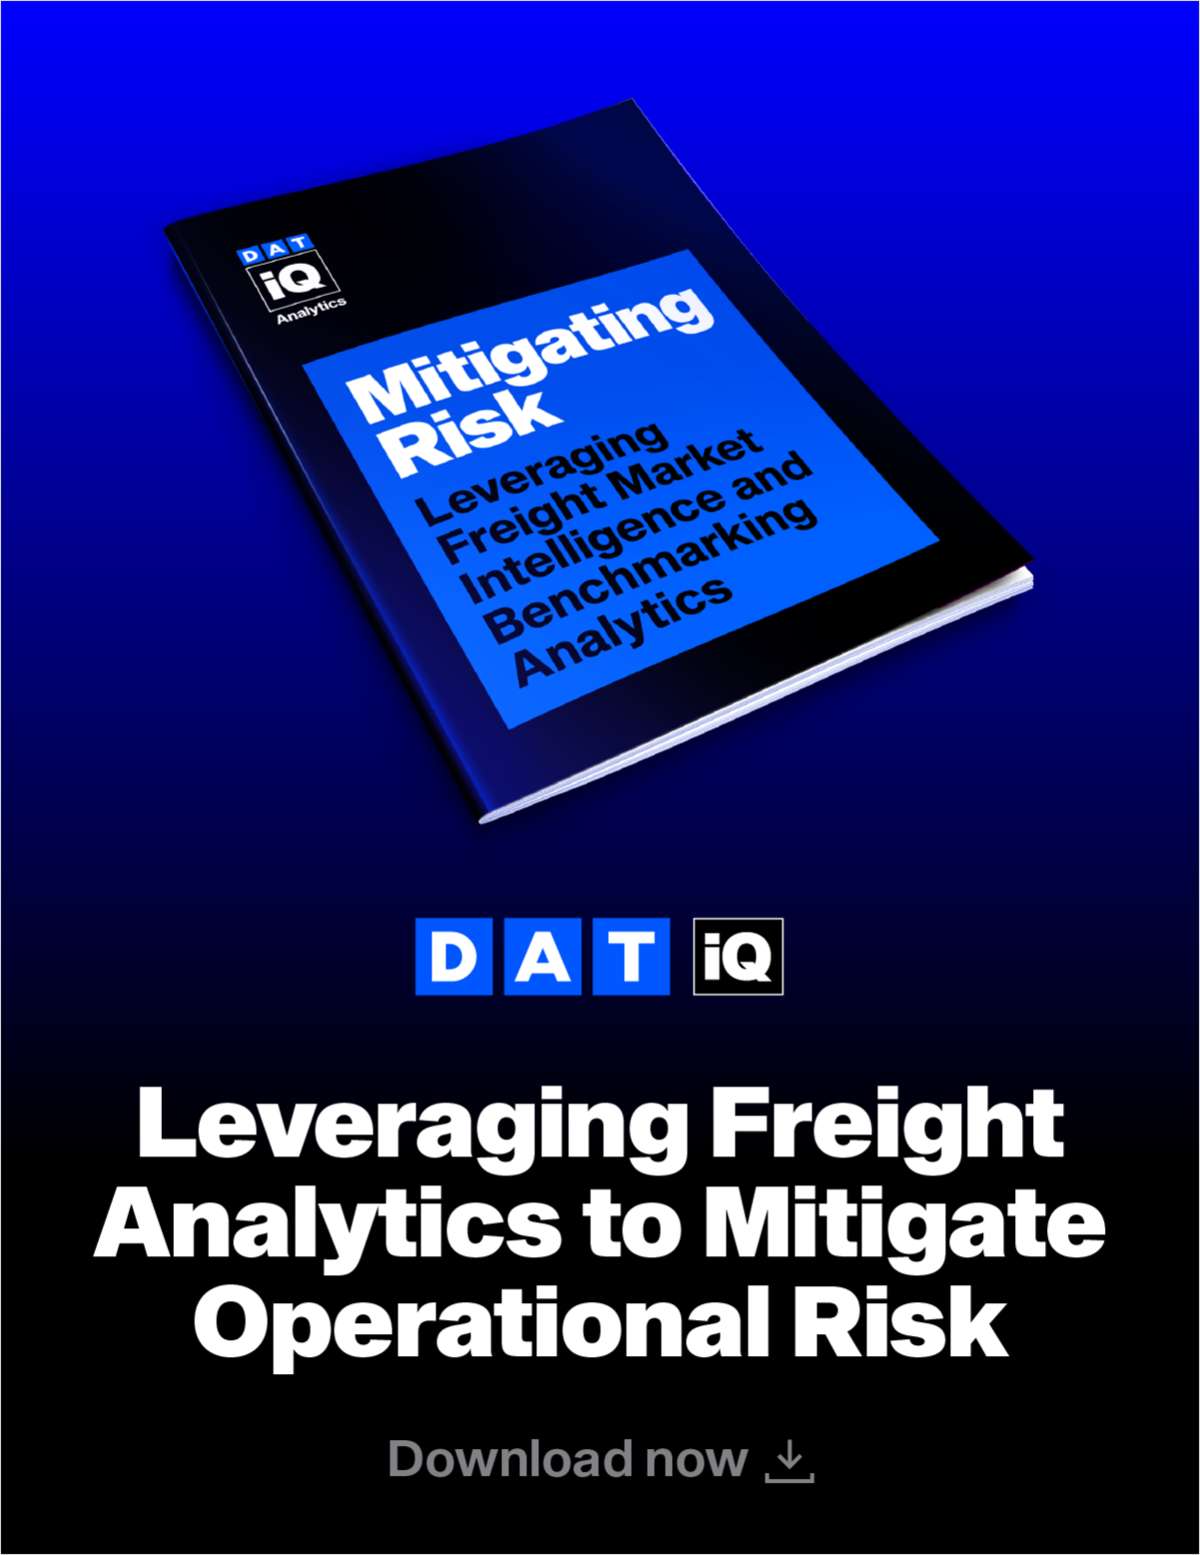 Leveraging Freight Analytics and Benchmarking Data to Mitigate Operational Risk